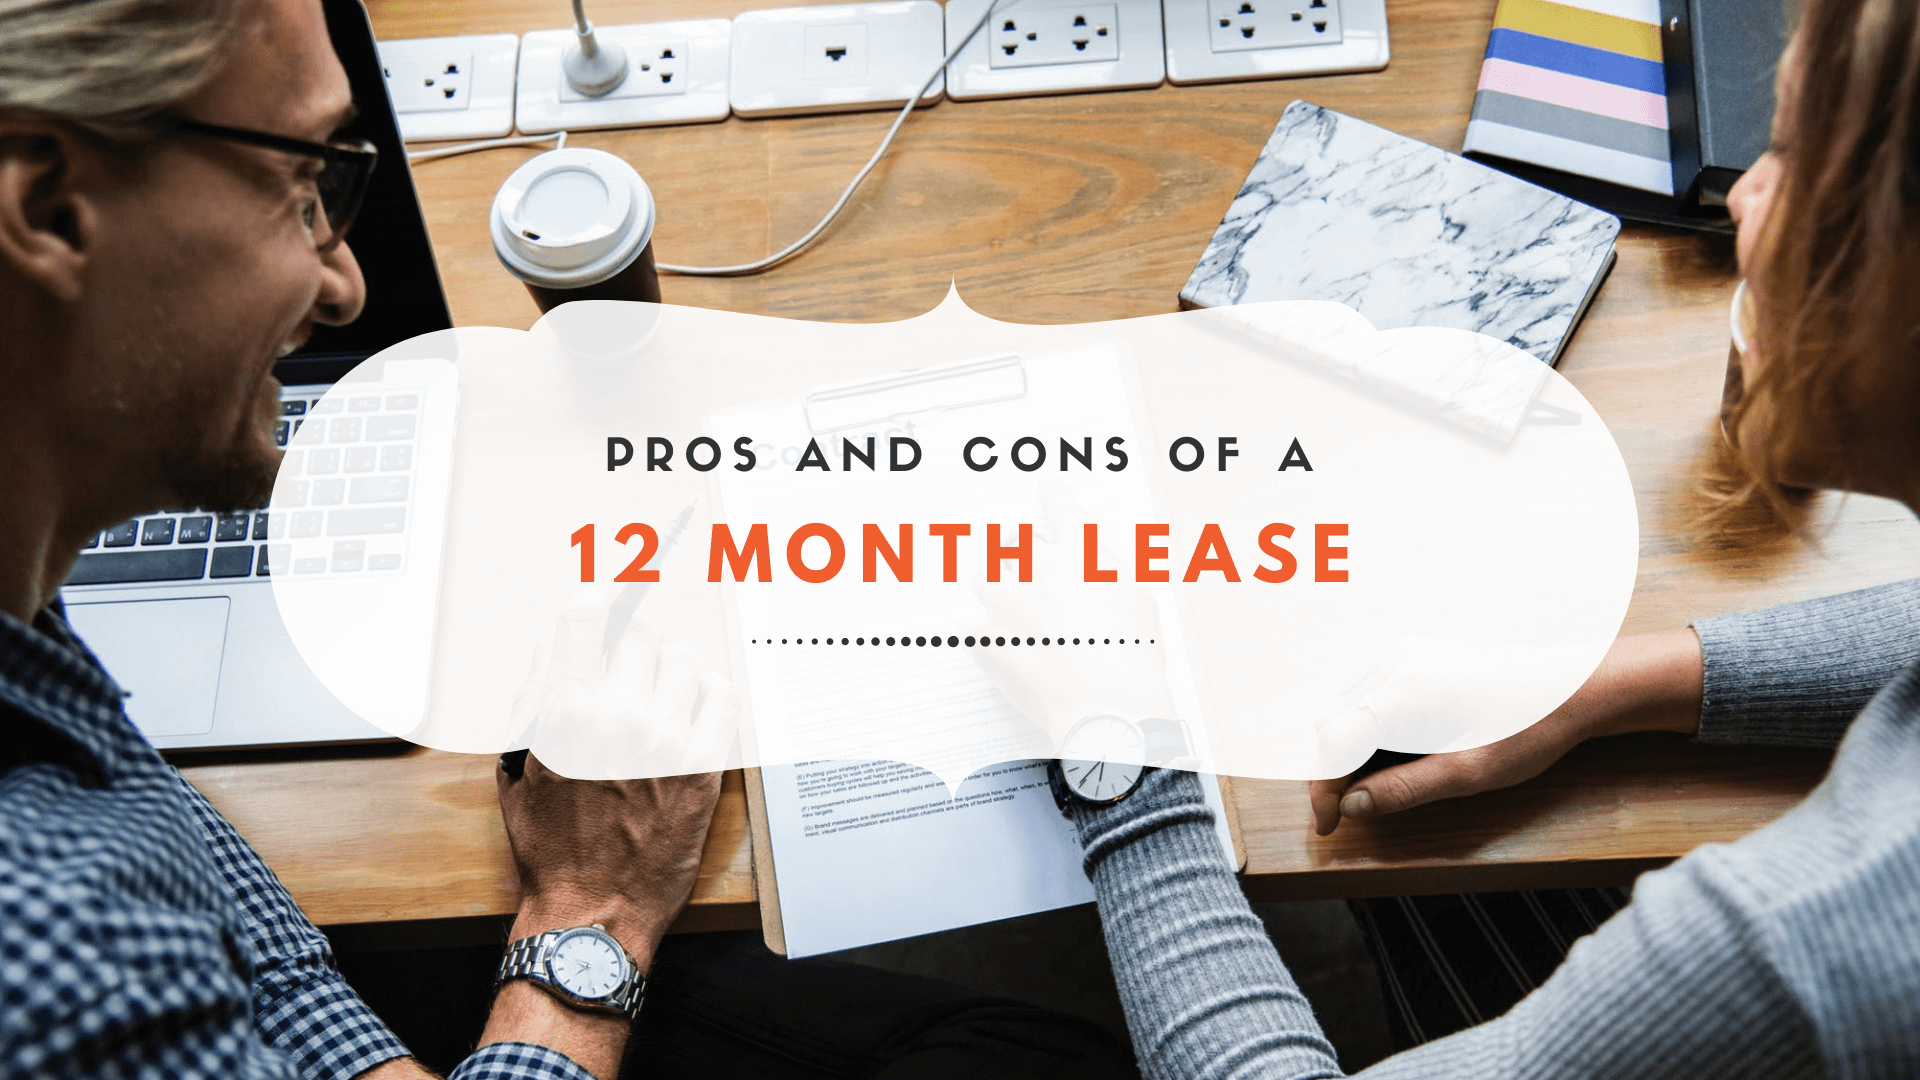 The Pros and Cons of a 12 Month Lease